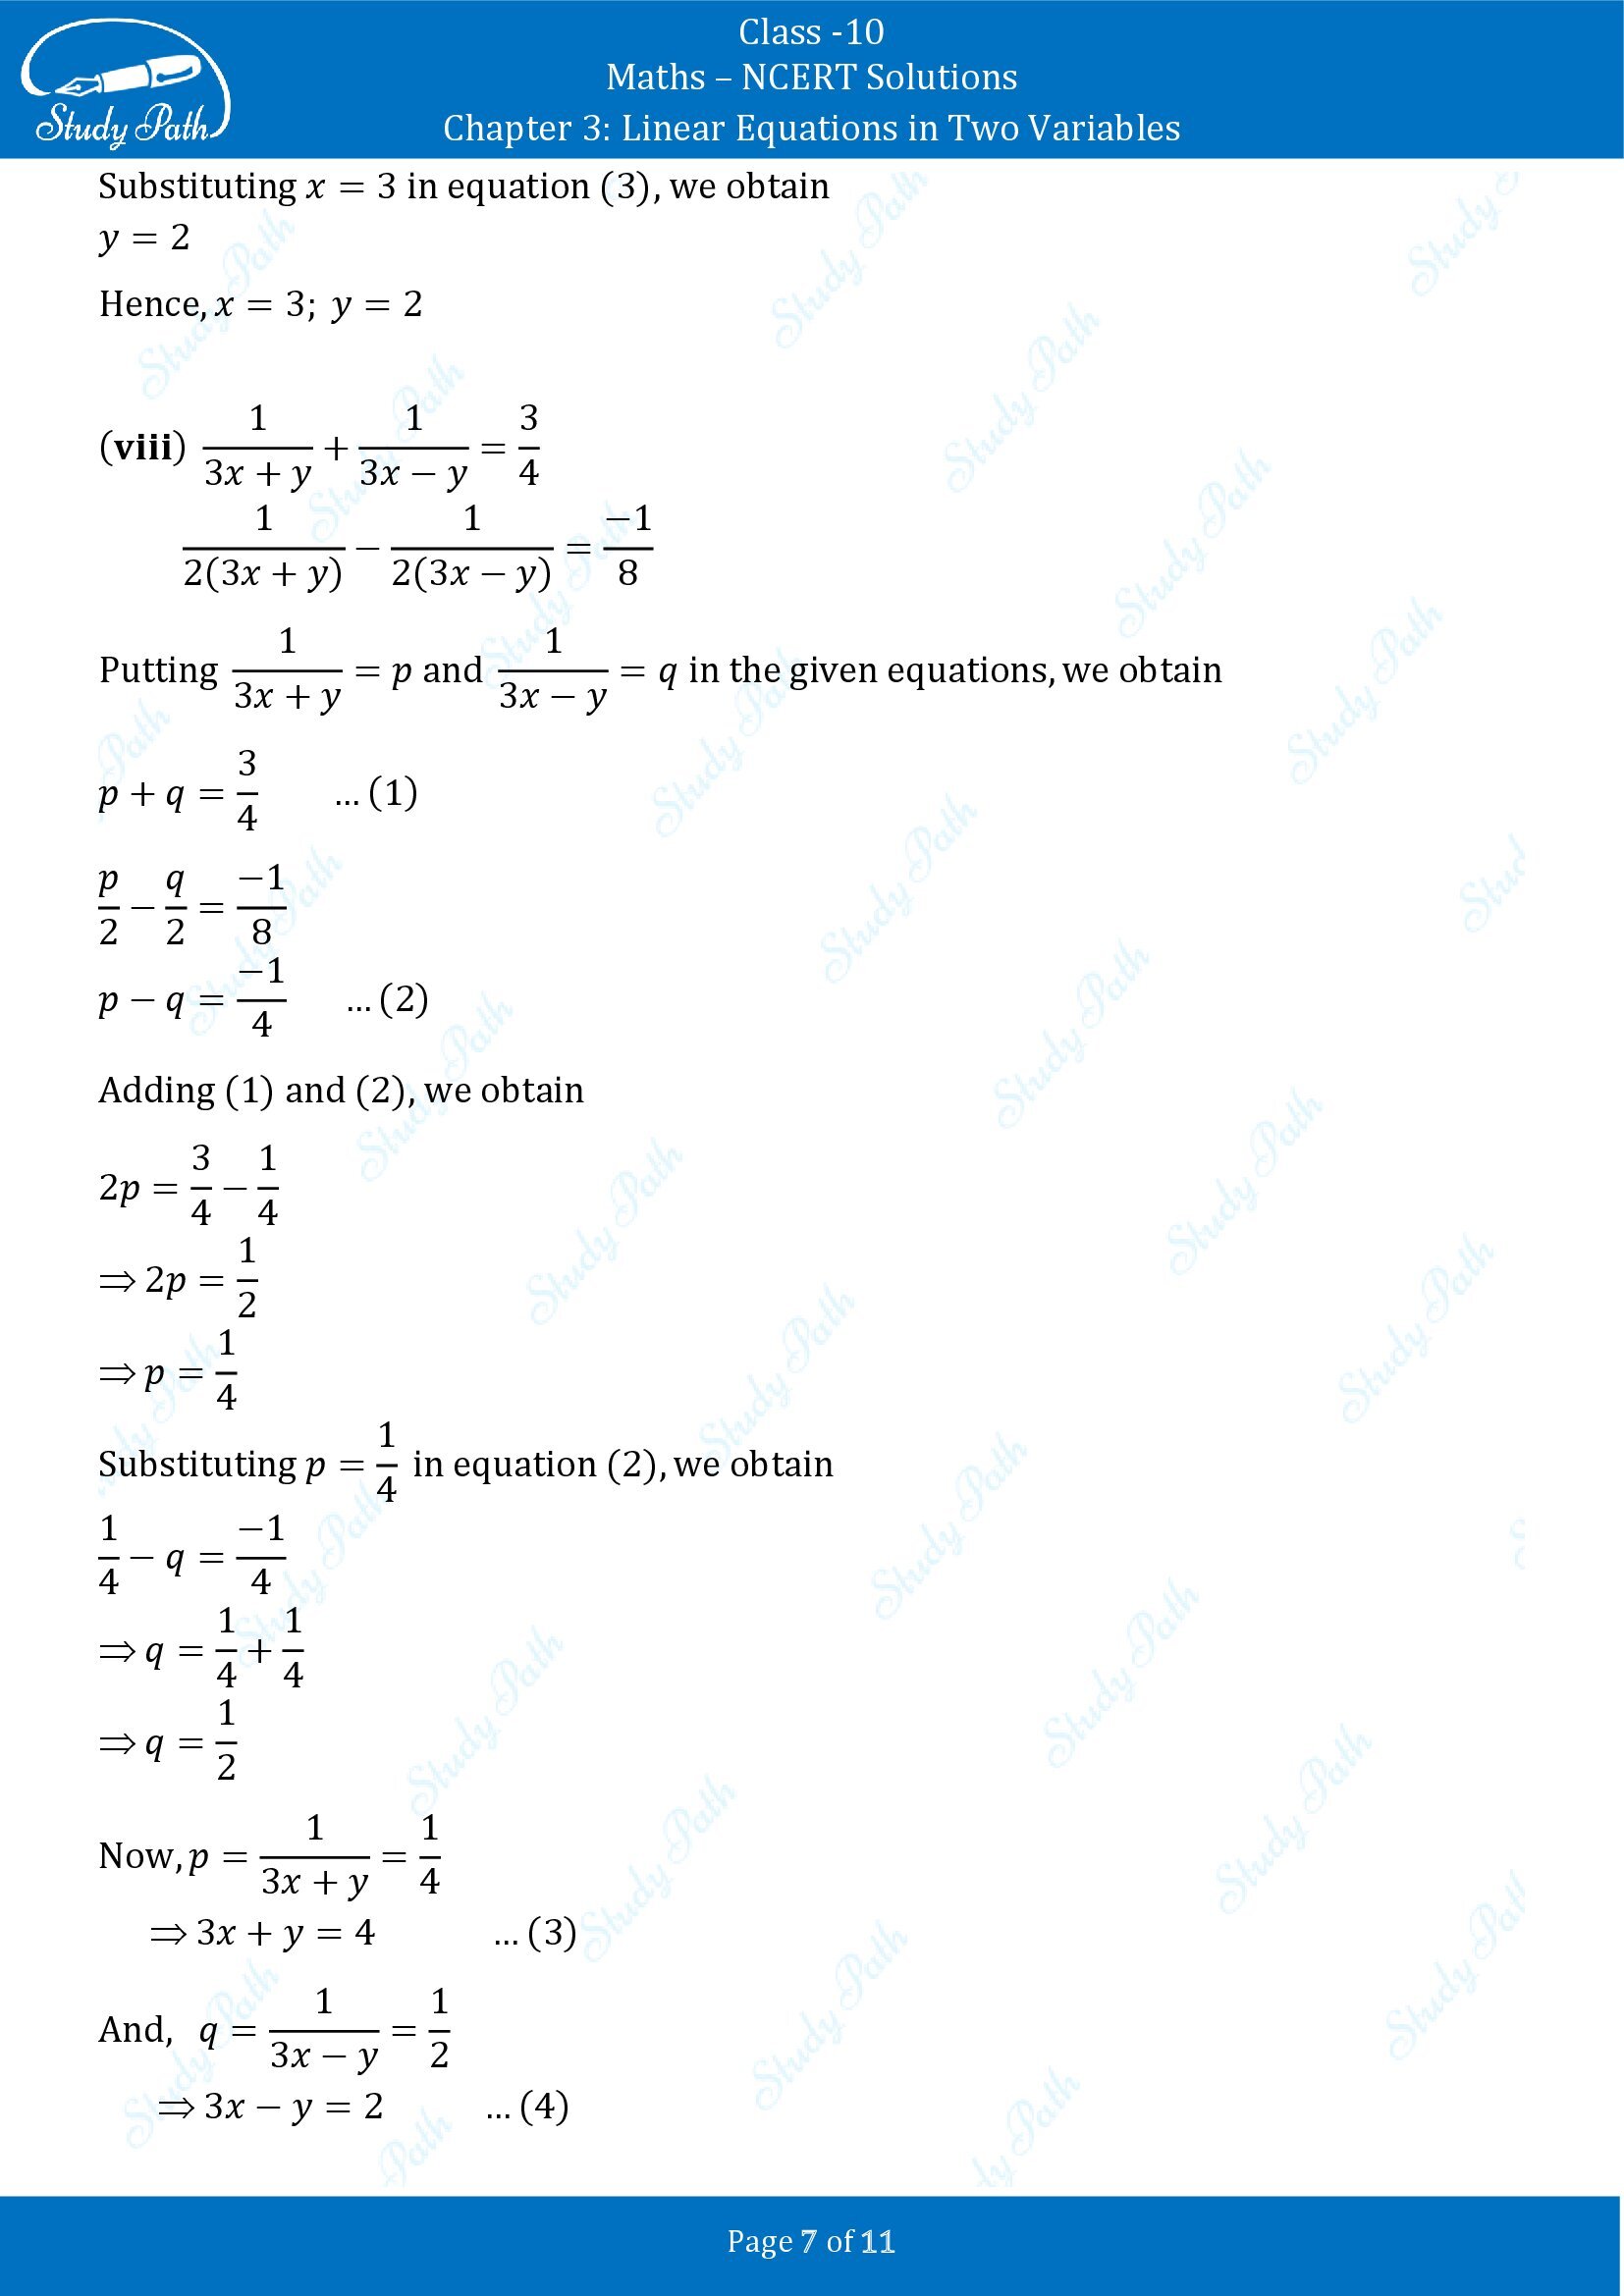 NCERT Solutions for Class 10 Maths Chapter 3 Linear Equations in Two Variables Exercise 3.6 00007